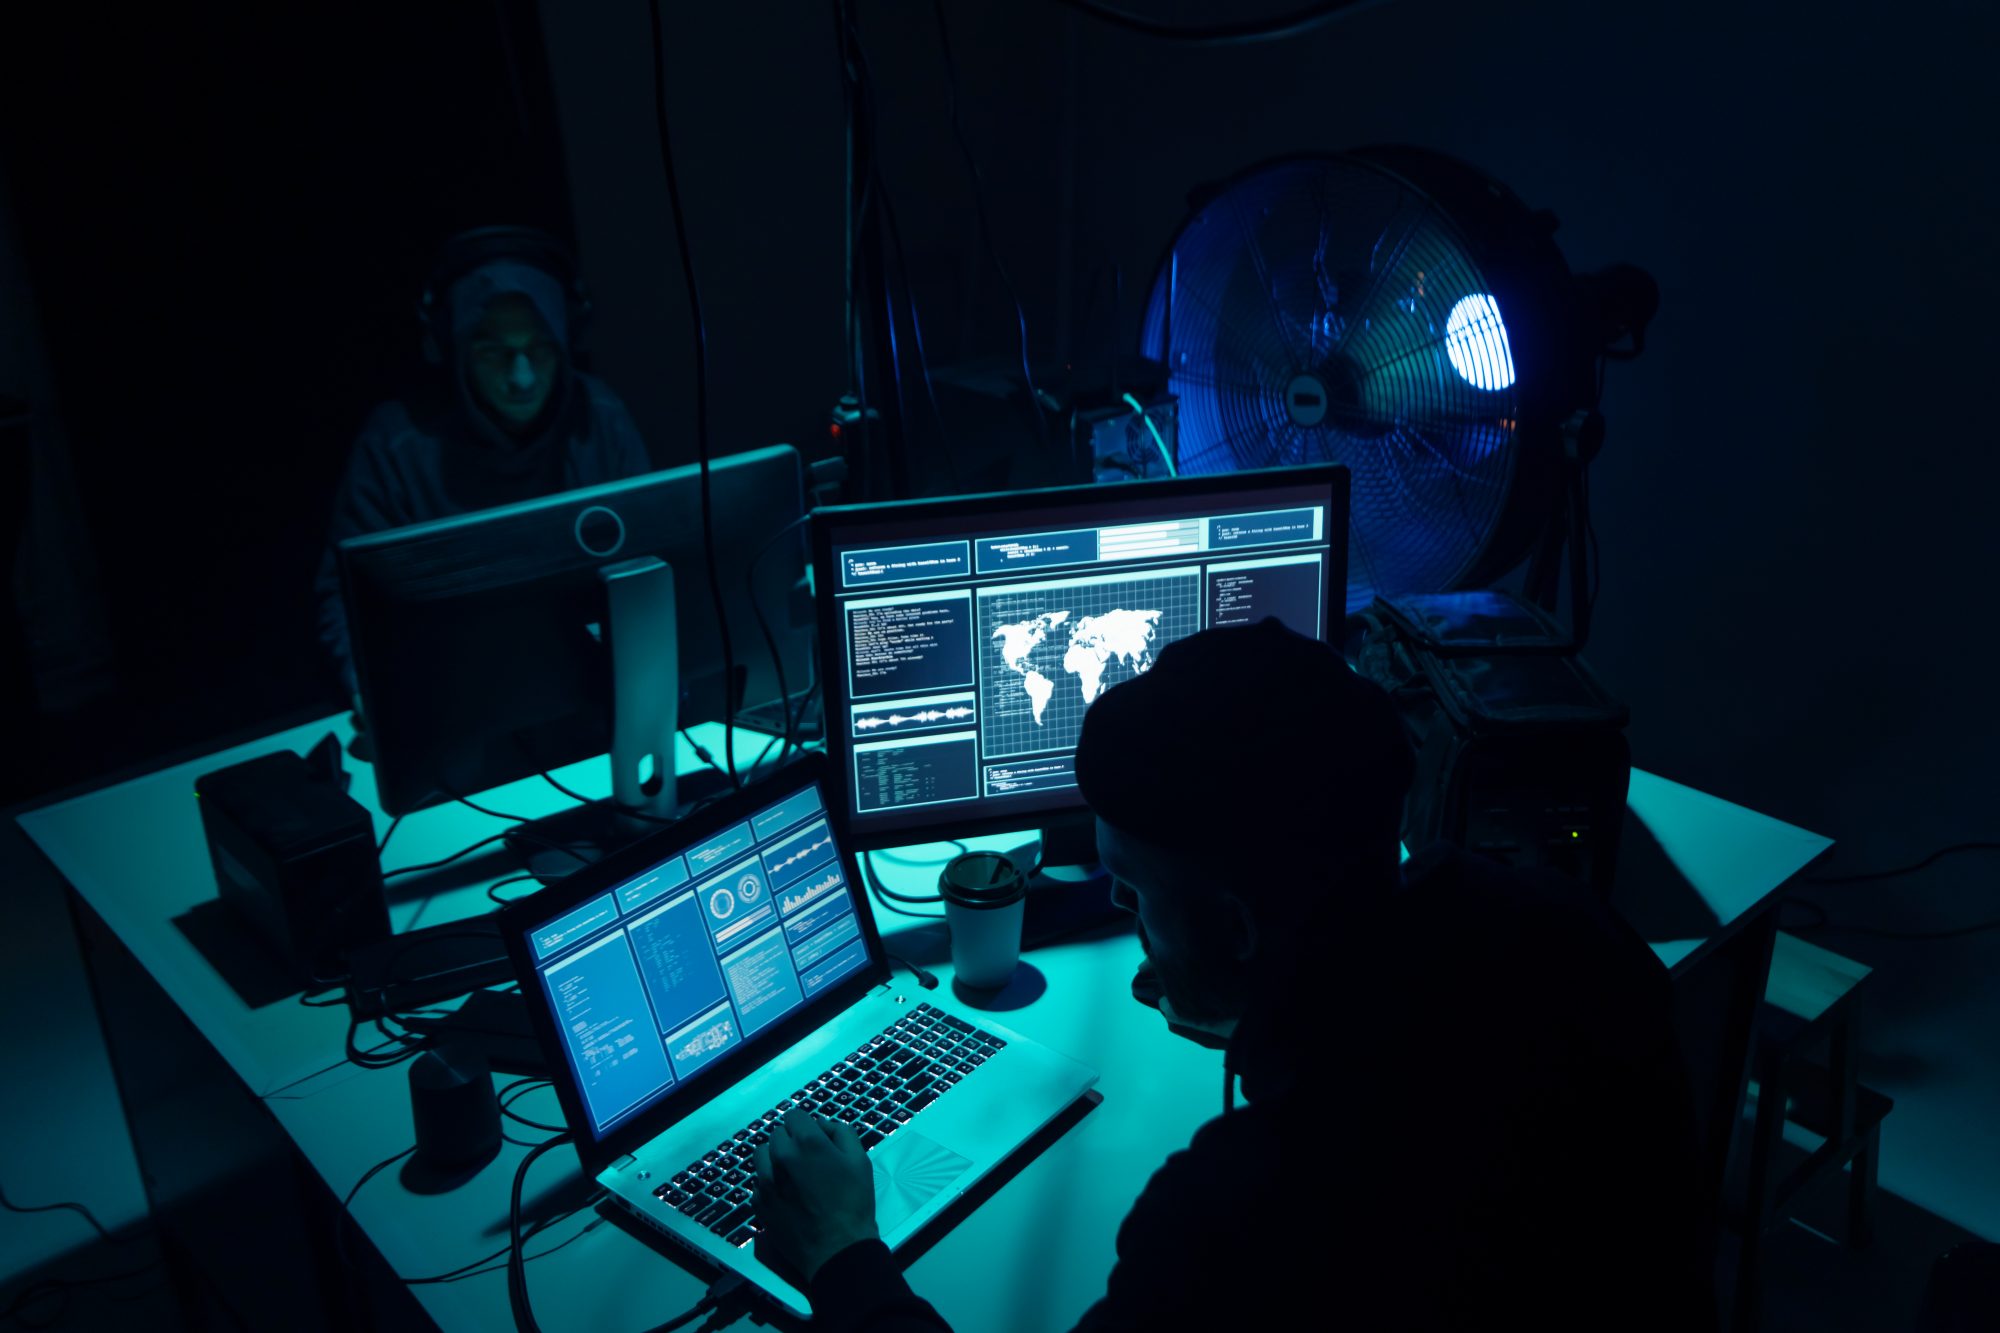 Hackers sat round table in dark room lit up by some blue lights breaking server using multiple computers and infected virus ransomware